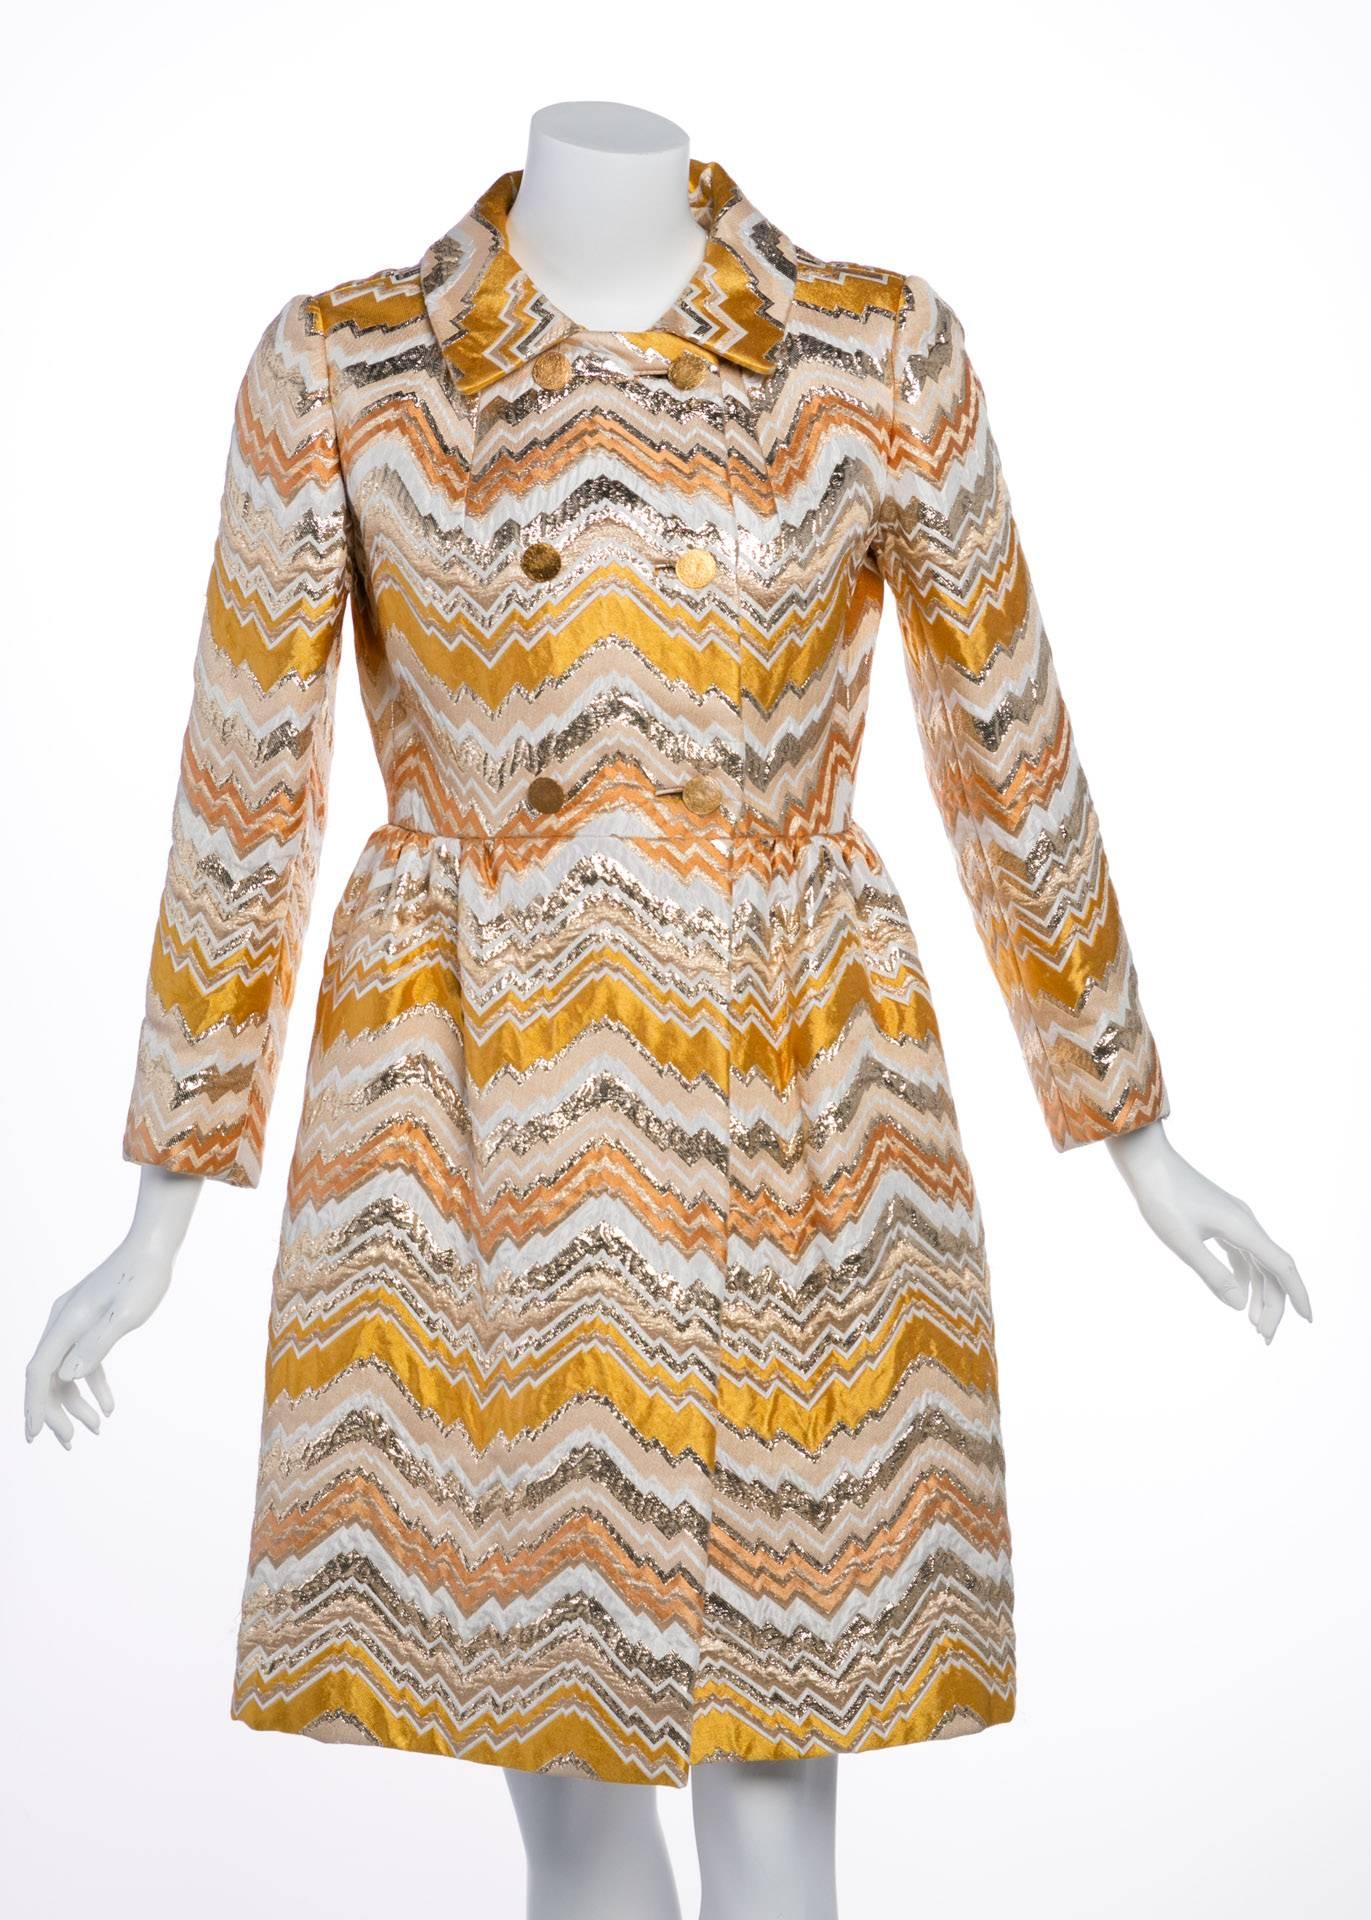 This magnificent metallic coat dress dates back to the Sixties, when an up-and-coming Bill Blass was still designing for Maurice Rentner, the decades-old American label he would eventually buy and make his own. Classic and glamorous, it is an early